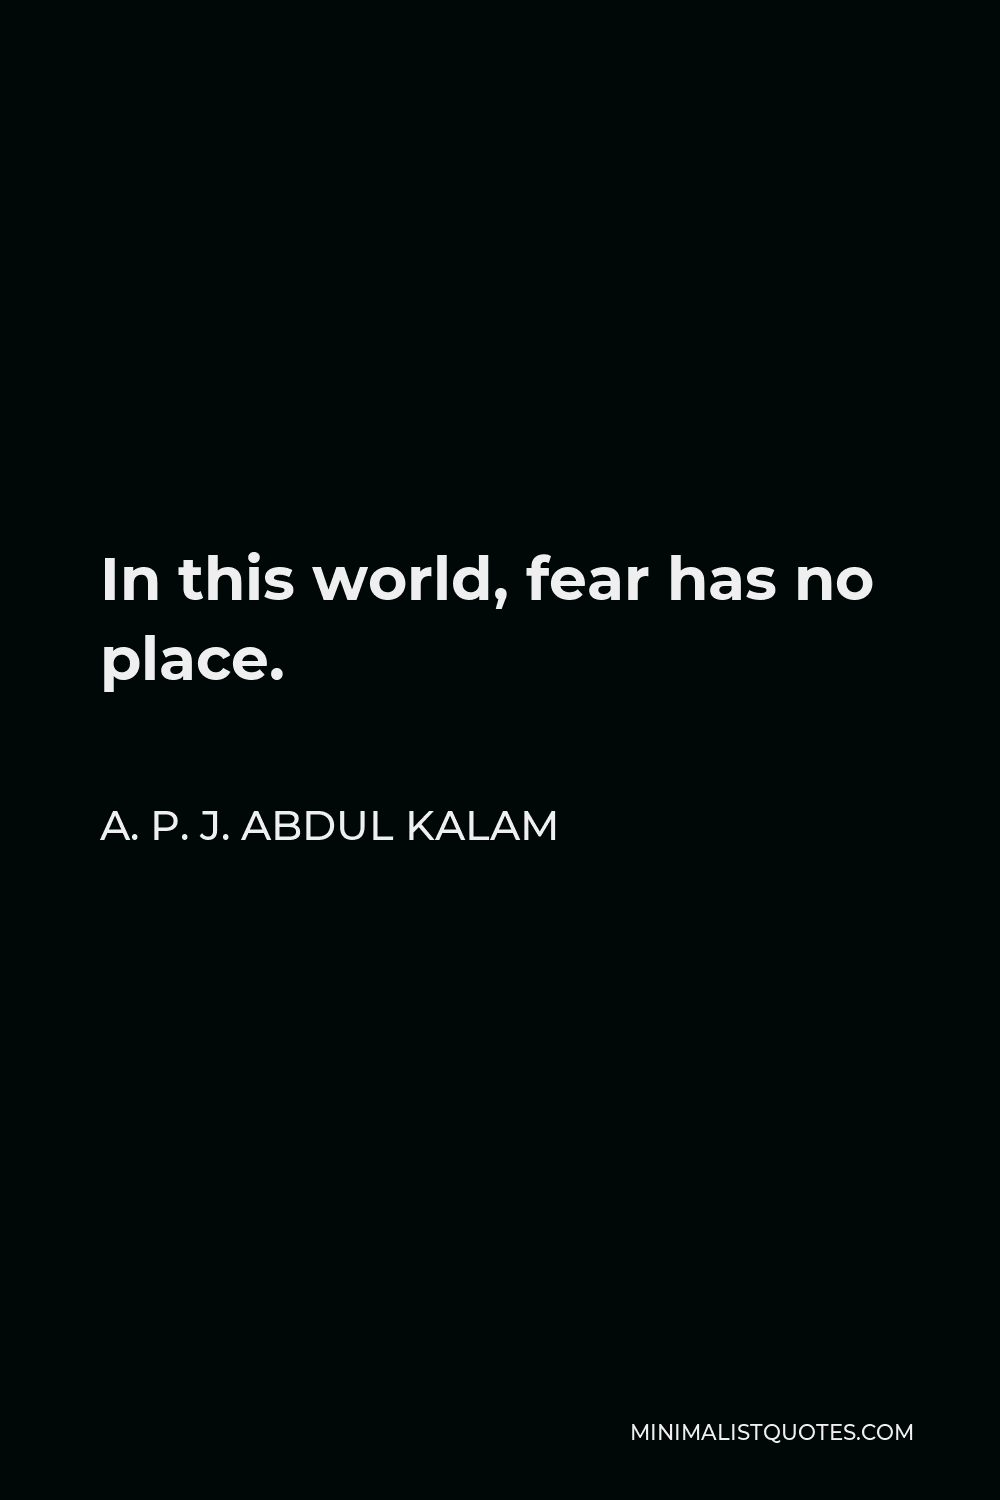 A. P. J. Abdul Kalam Quote - In this world, fear has no place.